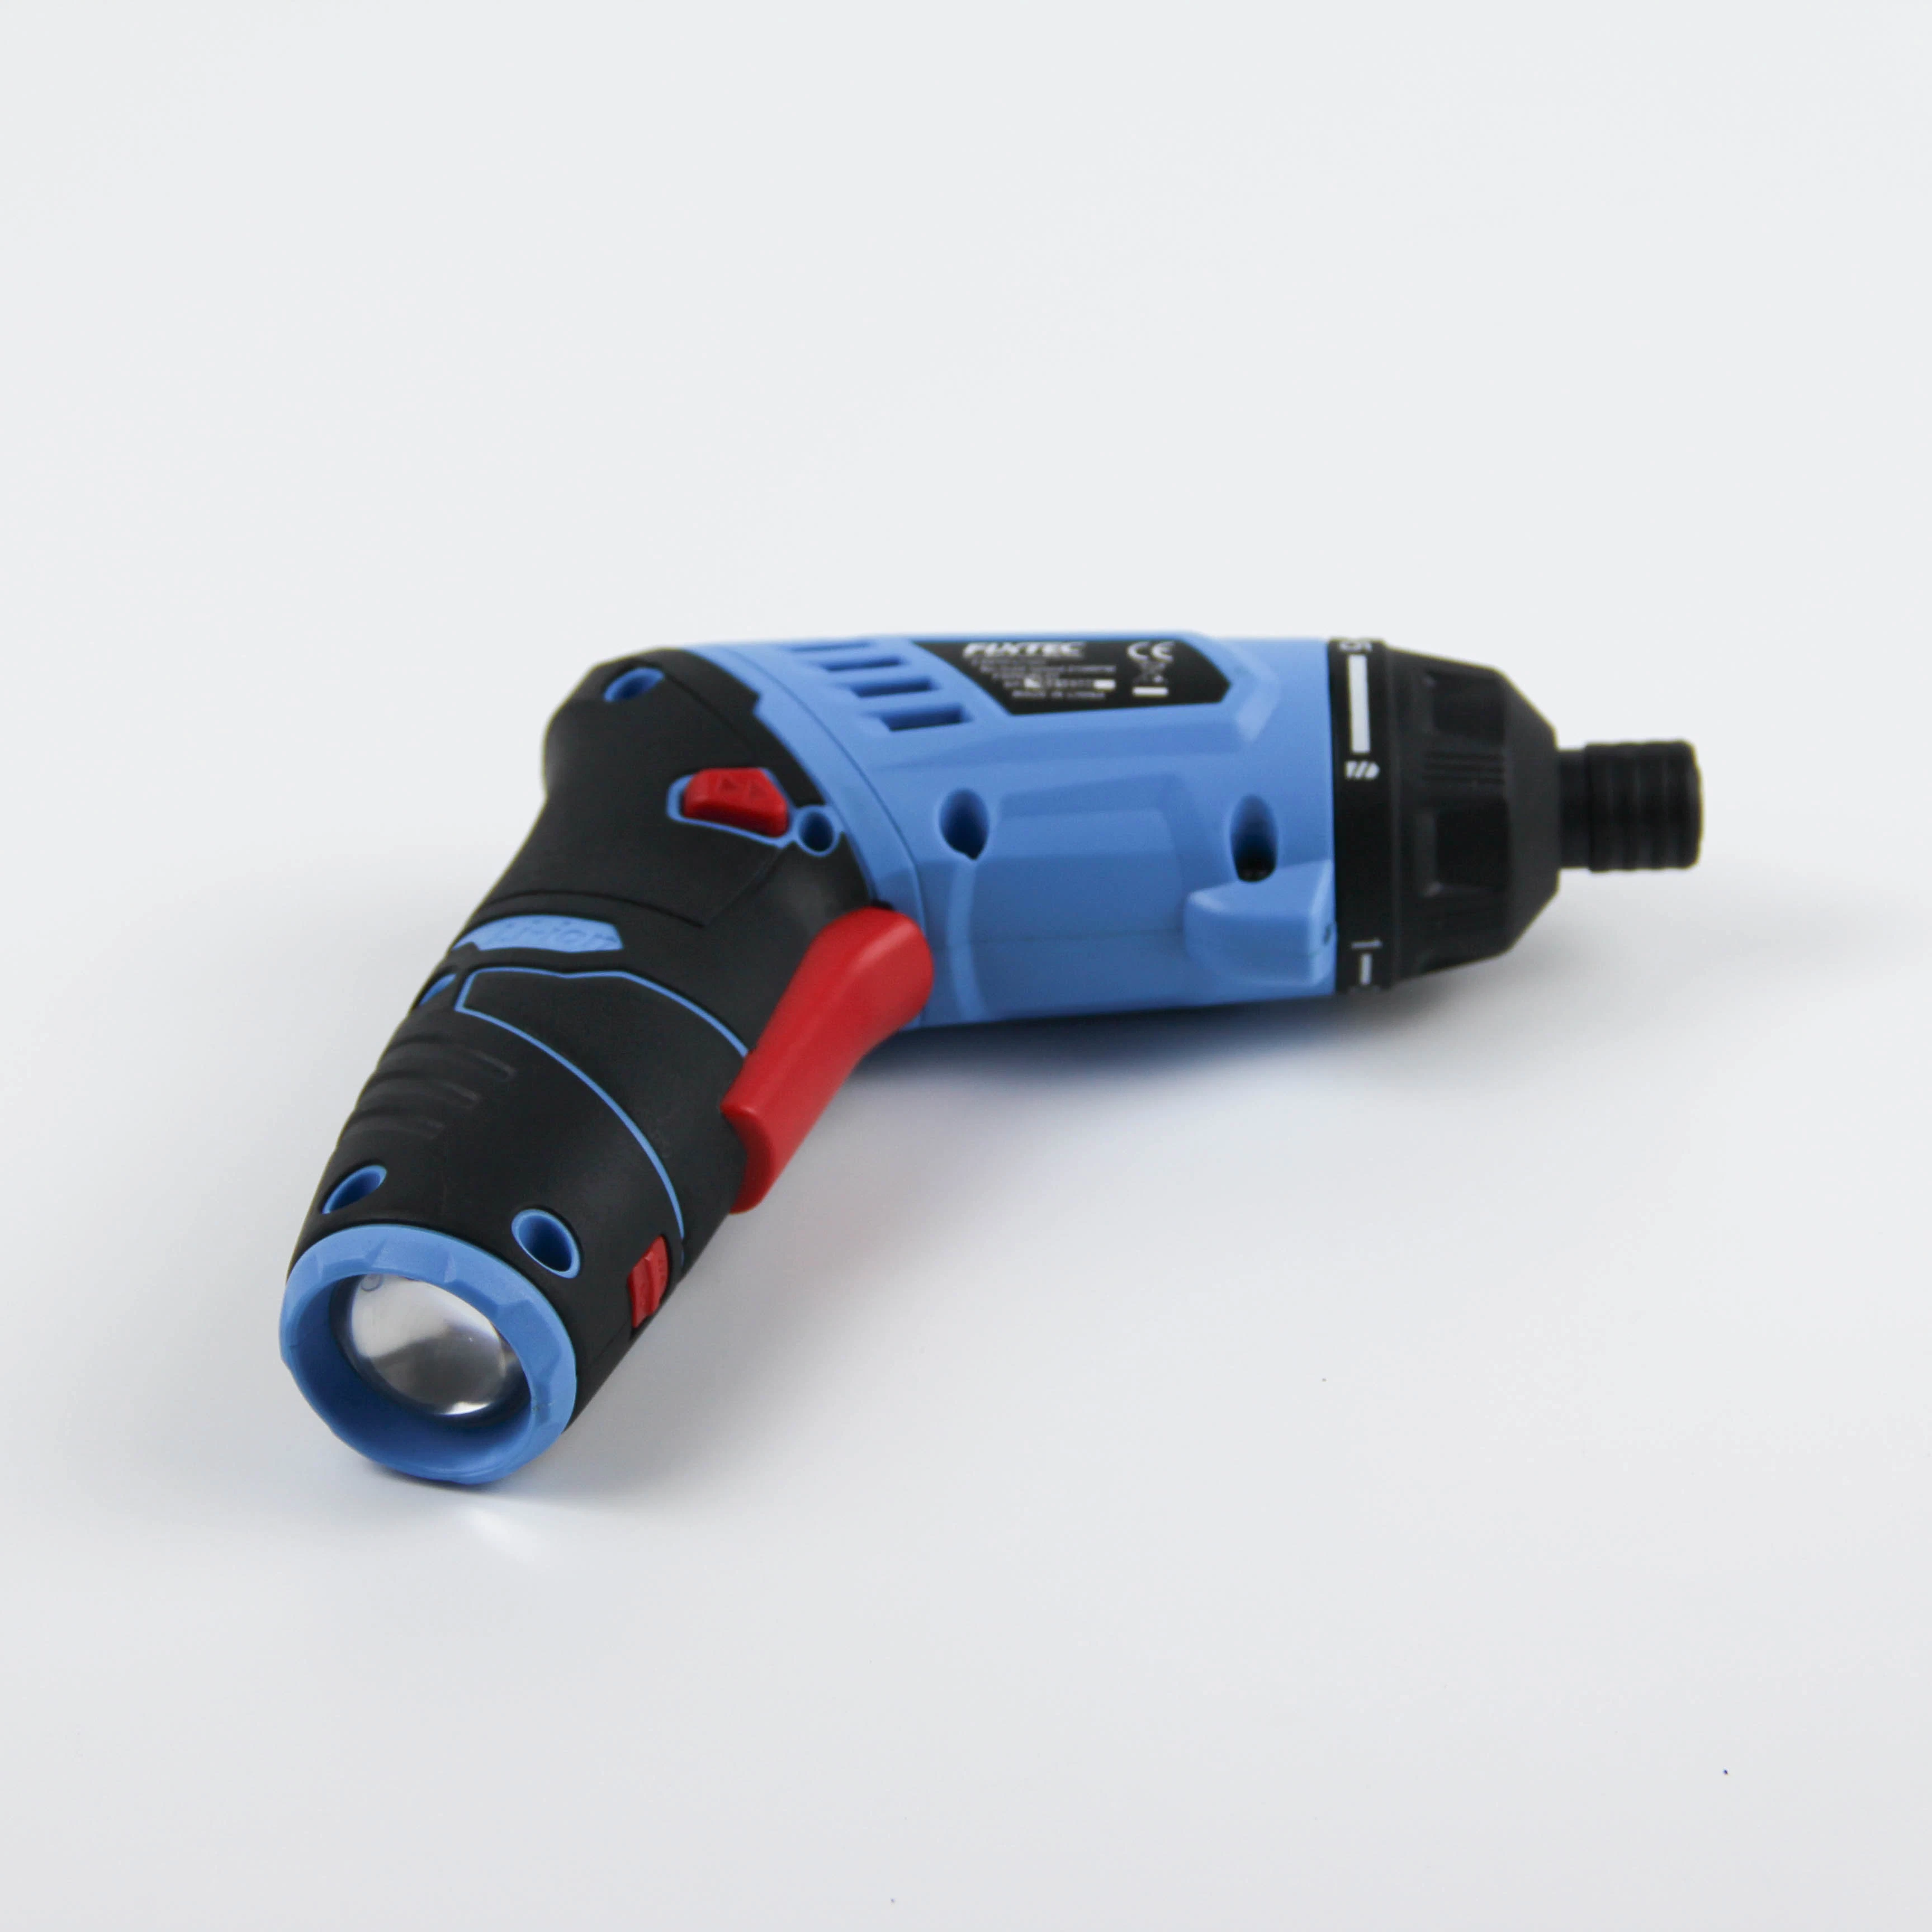 Rechargeable Mini Handheld Electric Screwdriver with Low Price